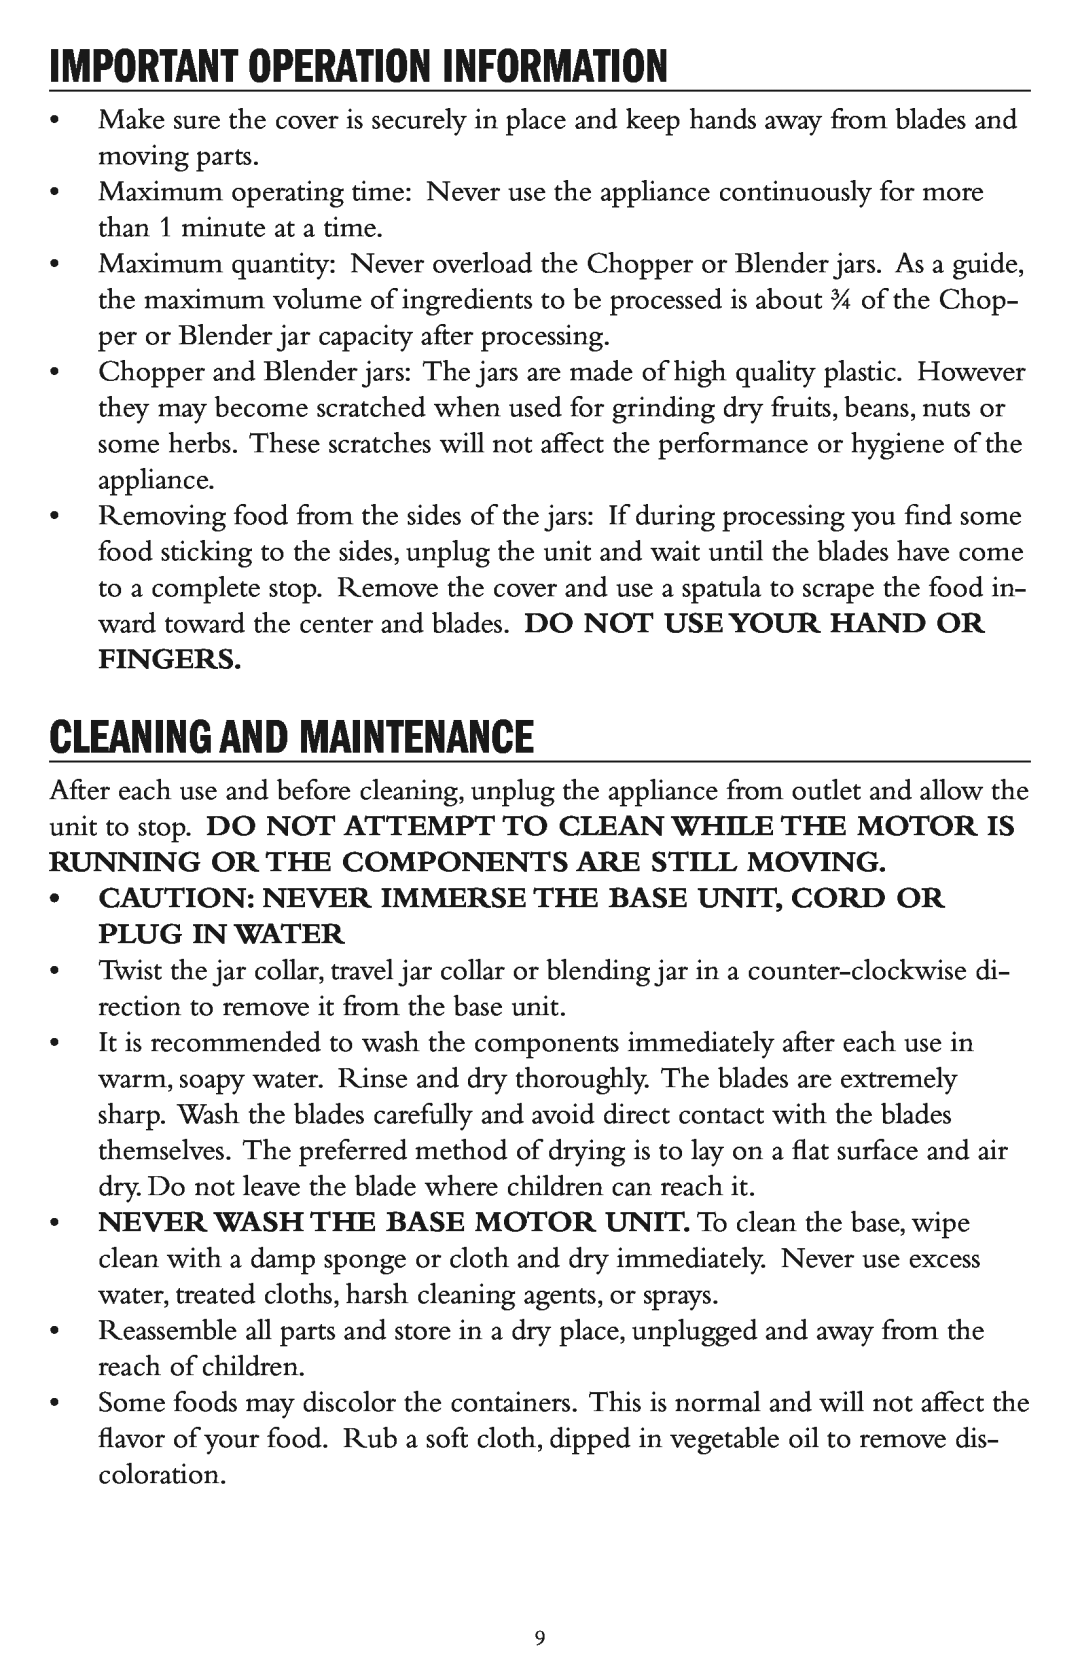 Taylor AB-1002-BL instruction manual Important Operation Information, Cleaning And Maintenance, Fingers 